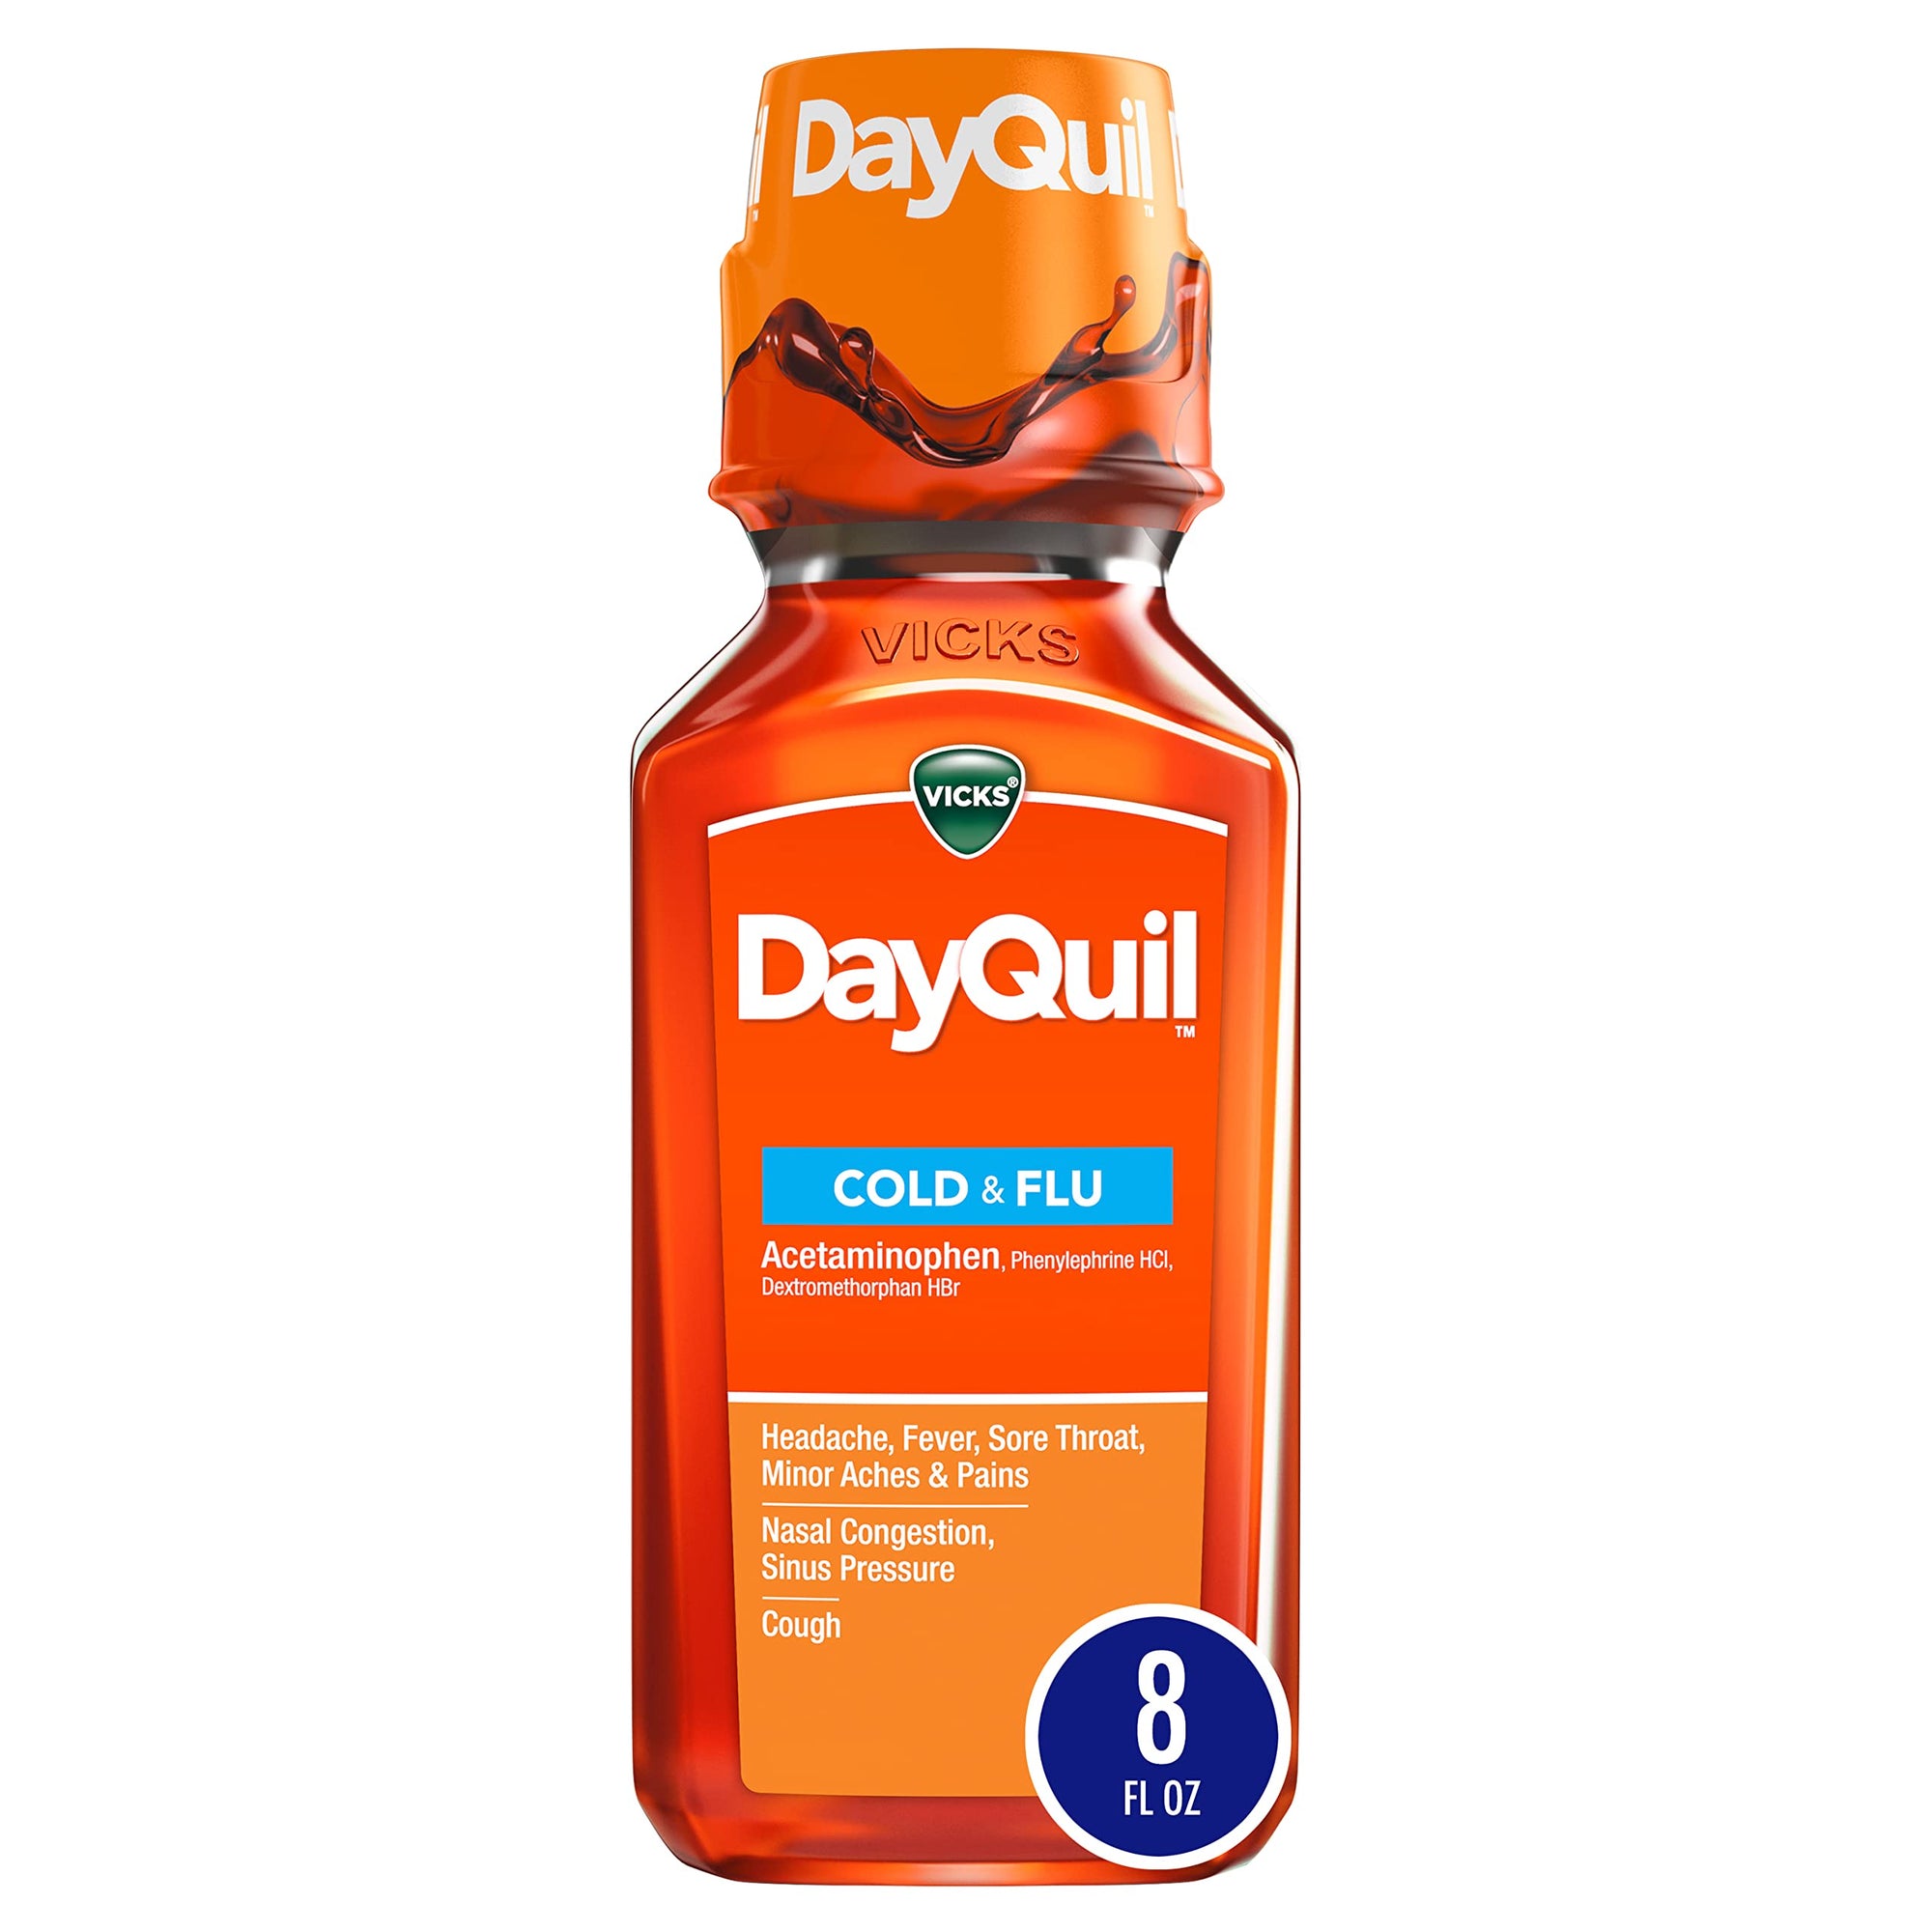 Vick's DayQuil Cold & Flu 8oz